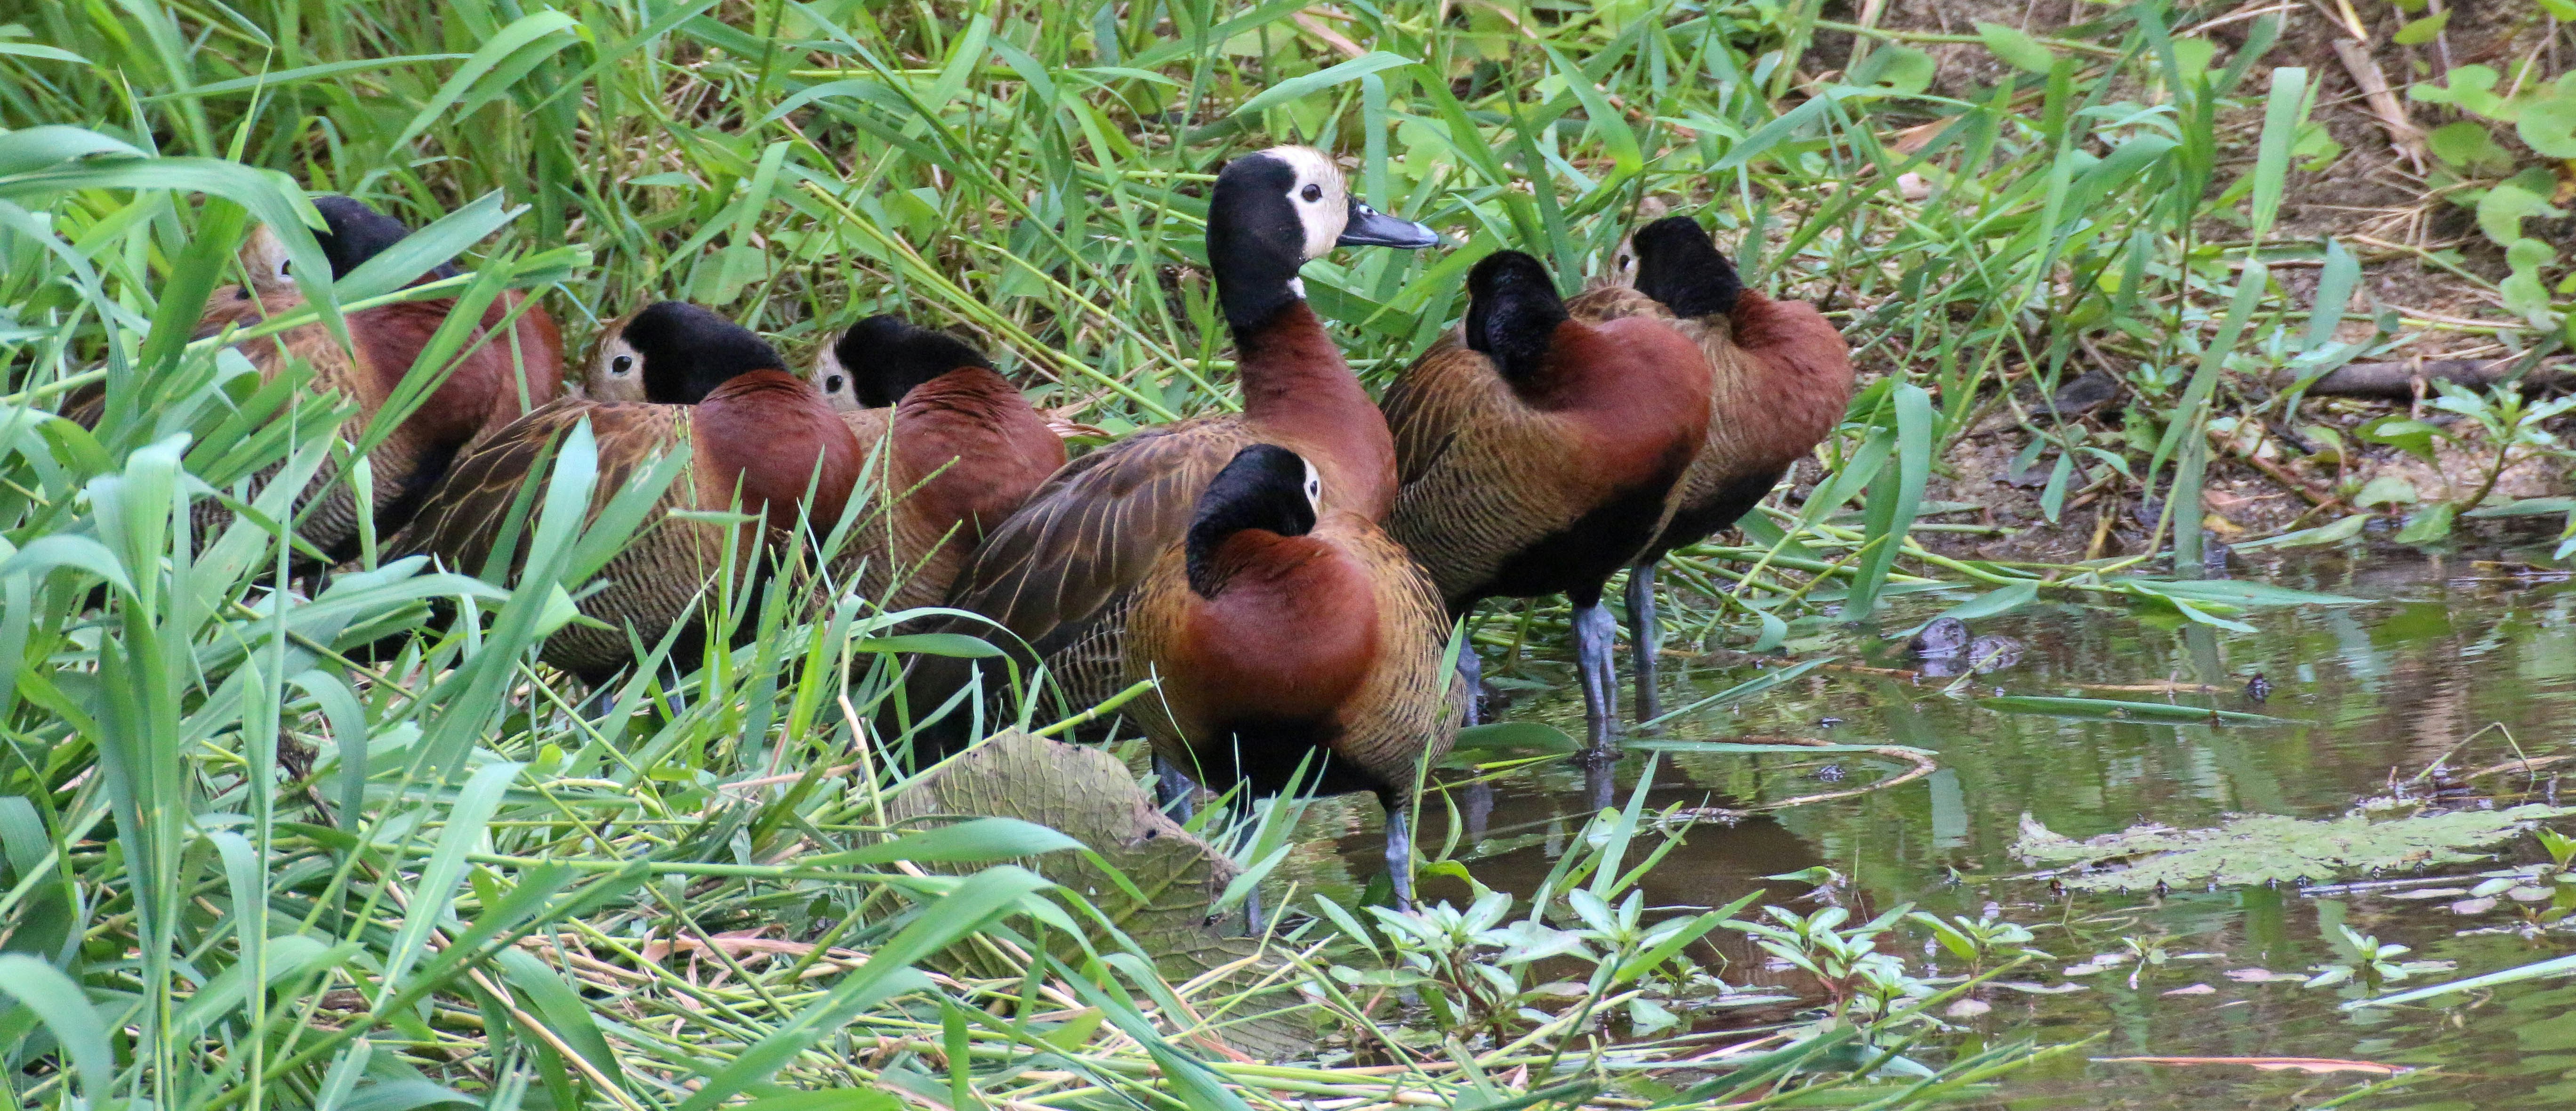 flock of brown and black birds on green grass during daytime